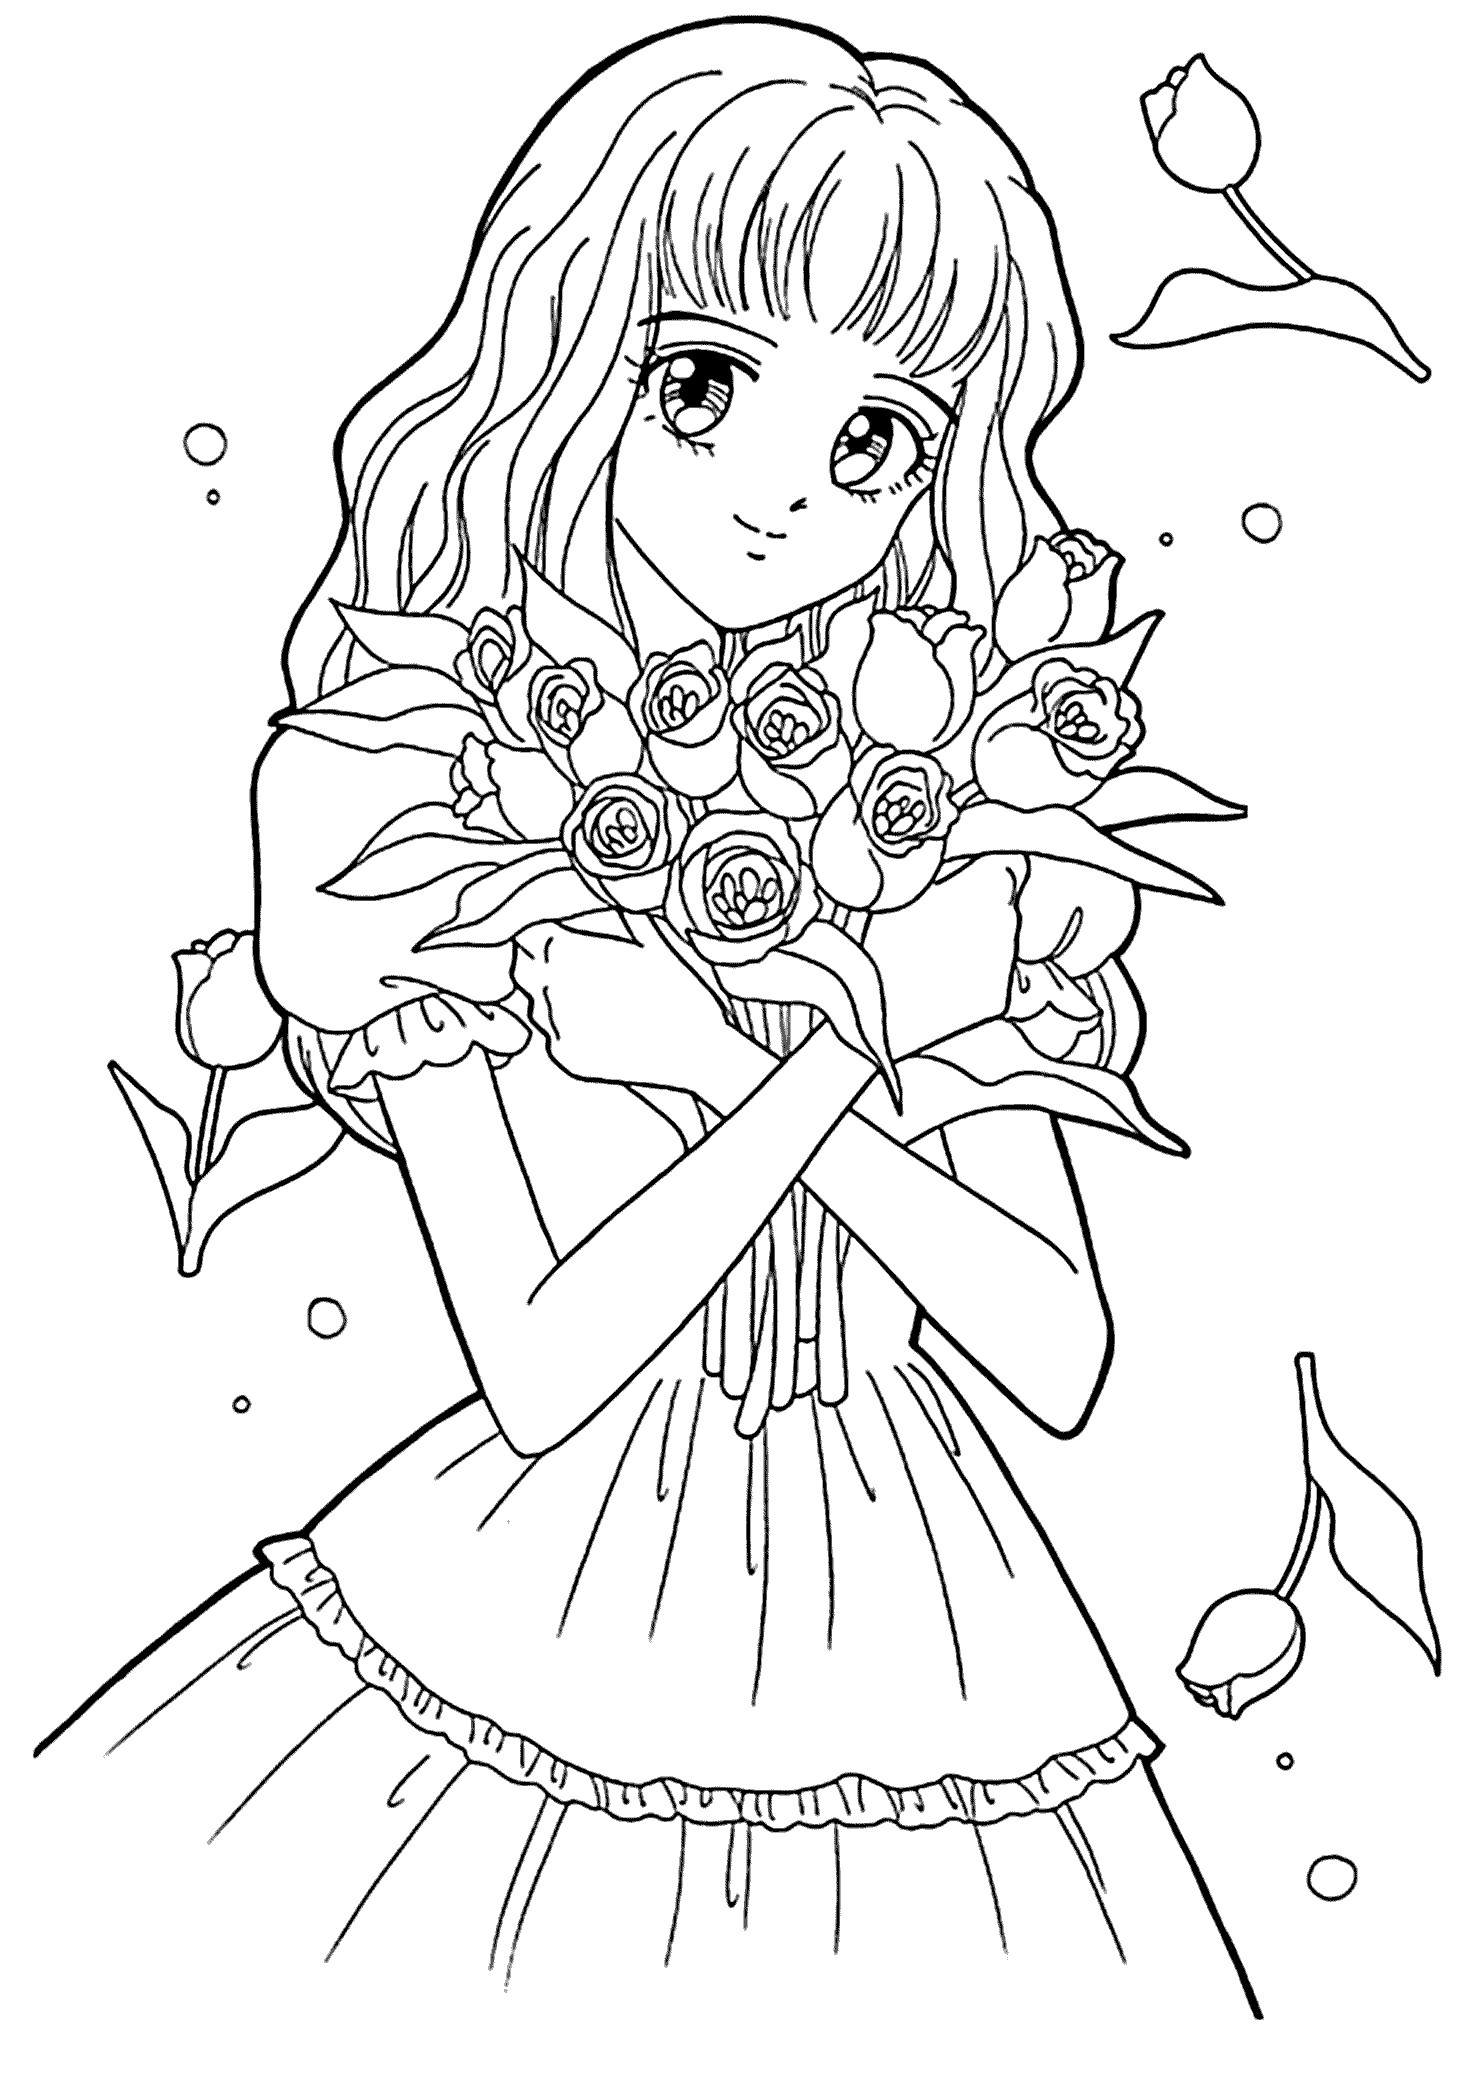 Printable Coloring Pages For Teenage Girls
 Best Free Printable Coloring Pages for Kids and Teens